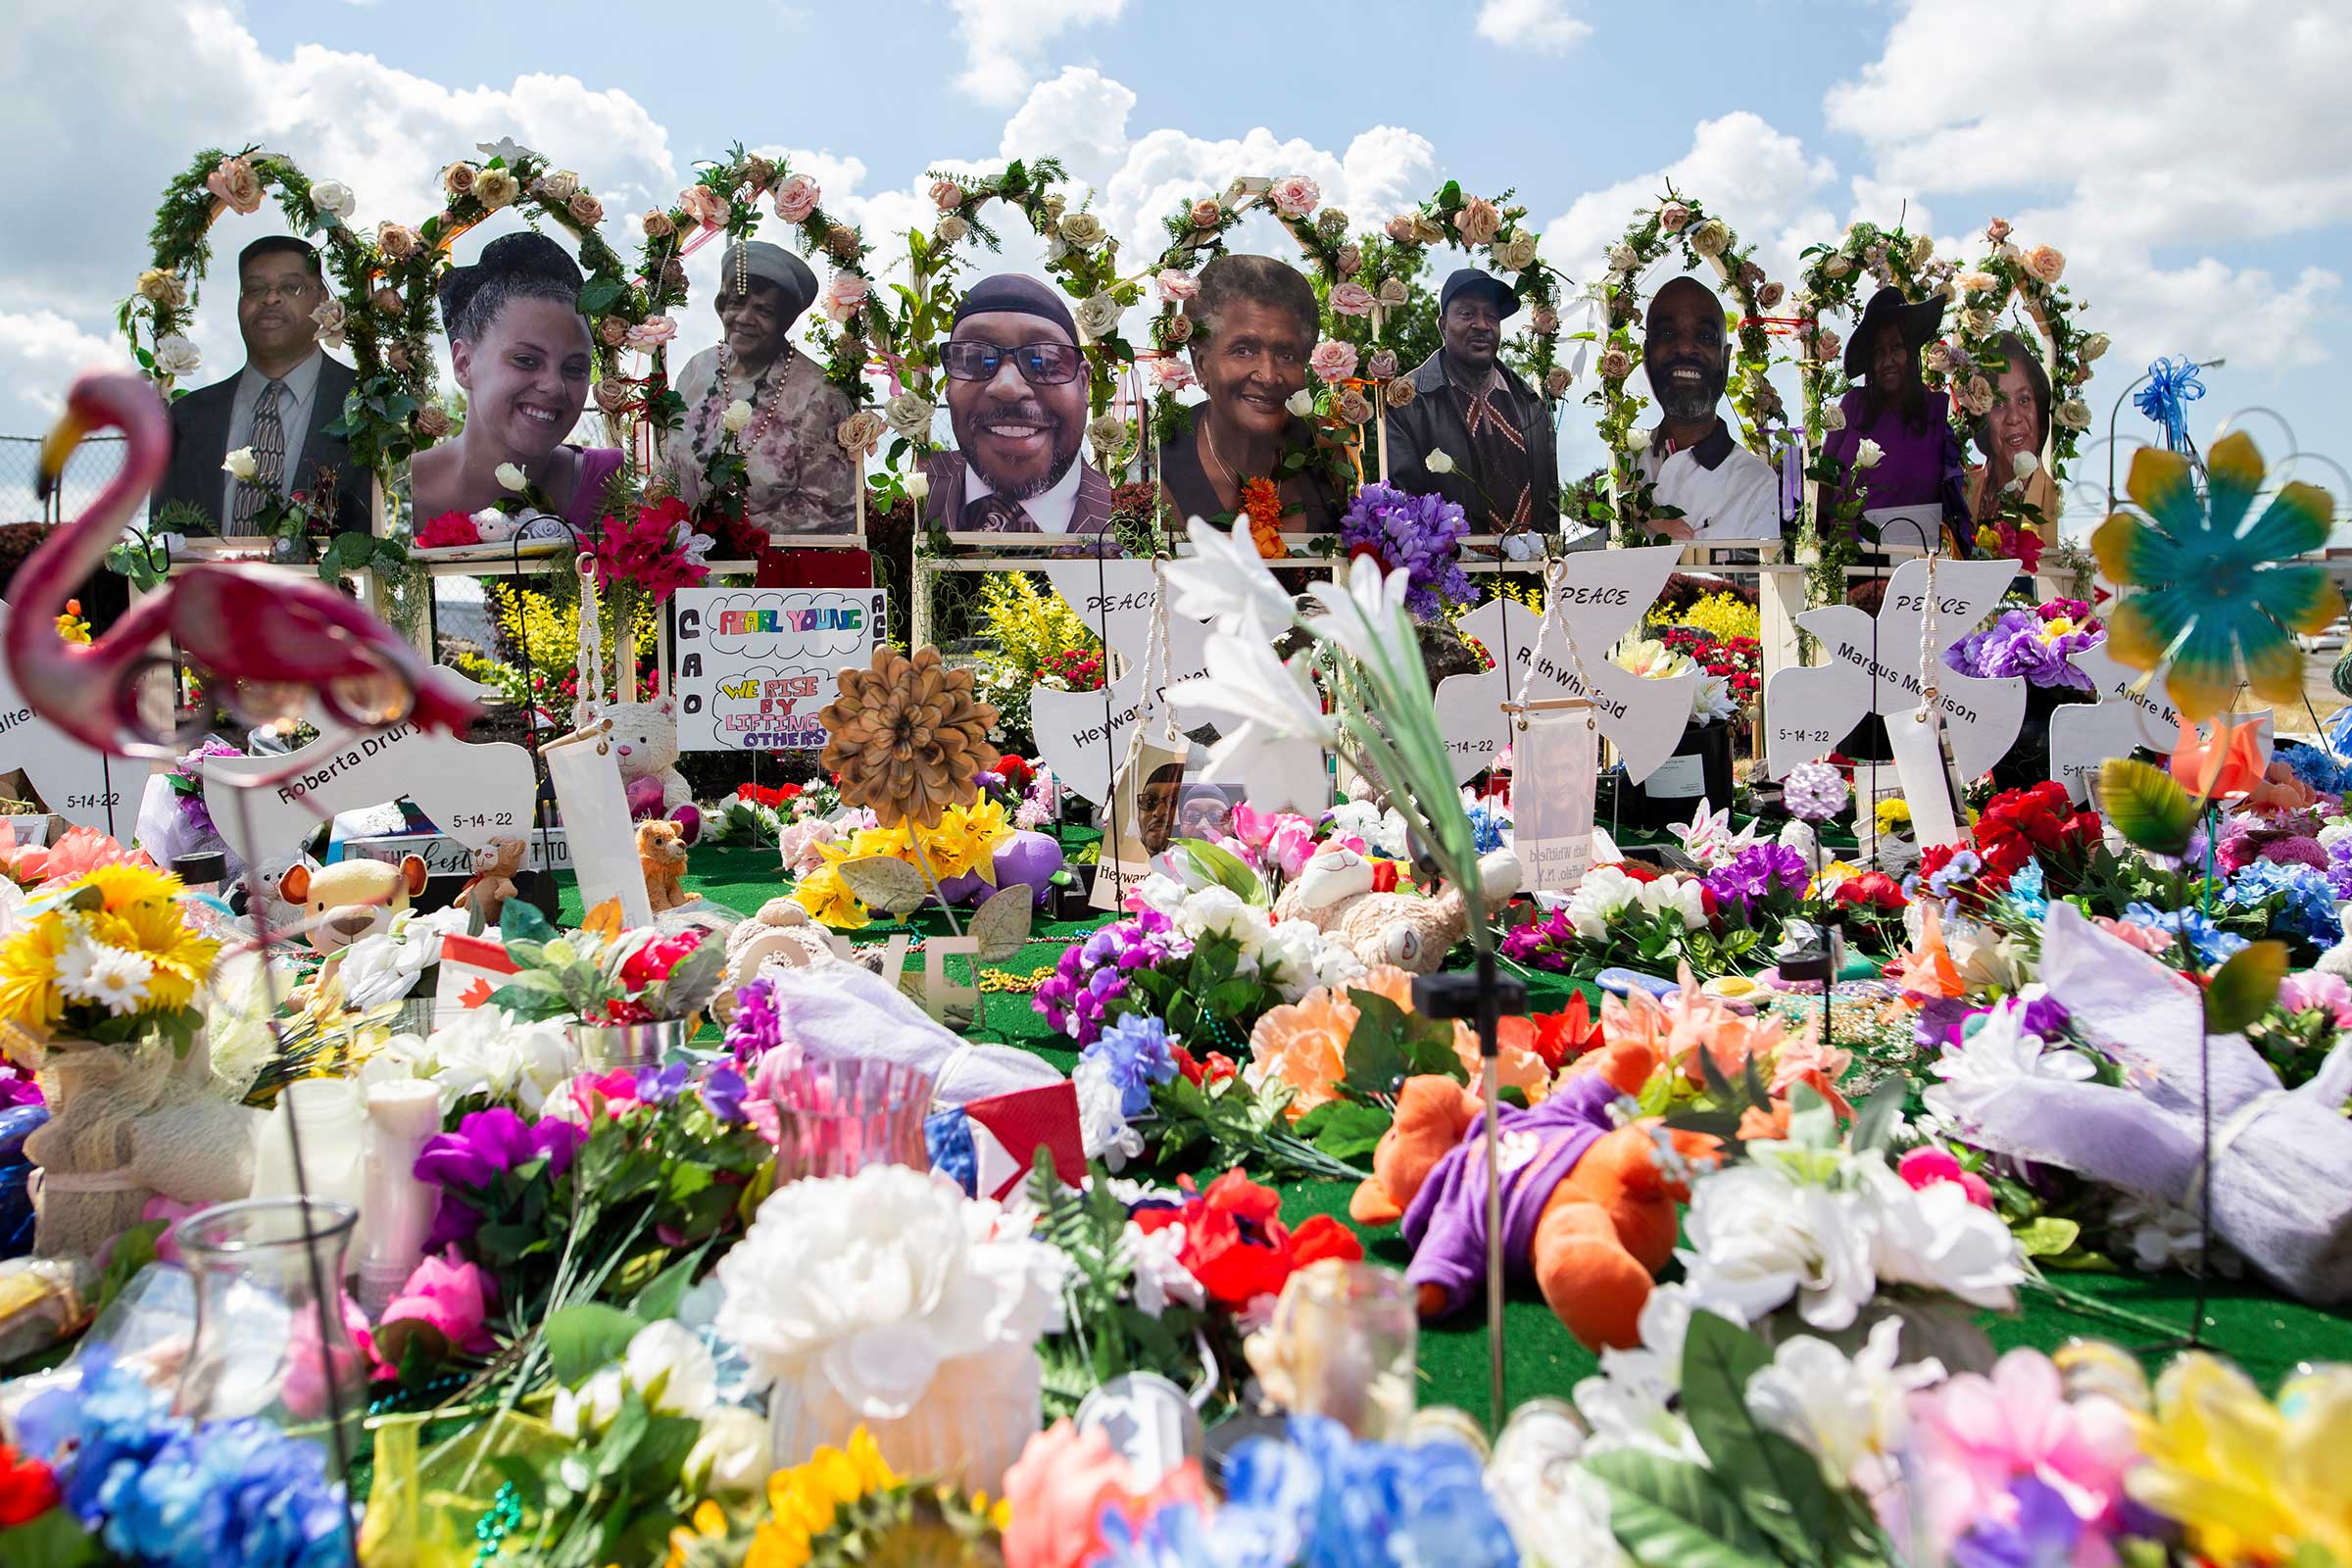 A memorial outside the Tops Friendly Market after a mass shooting in Buffalo, N.Y., is seen July 14, 2022. (Joshua Bessex—AP)